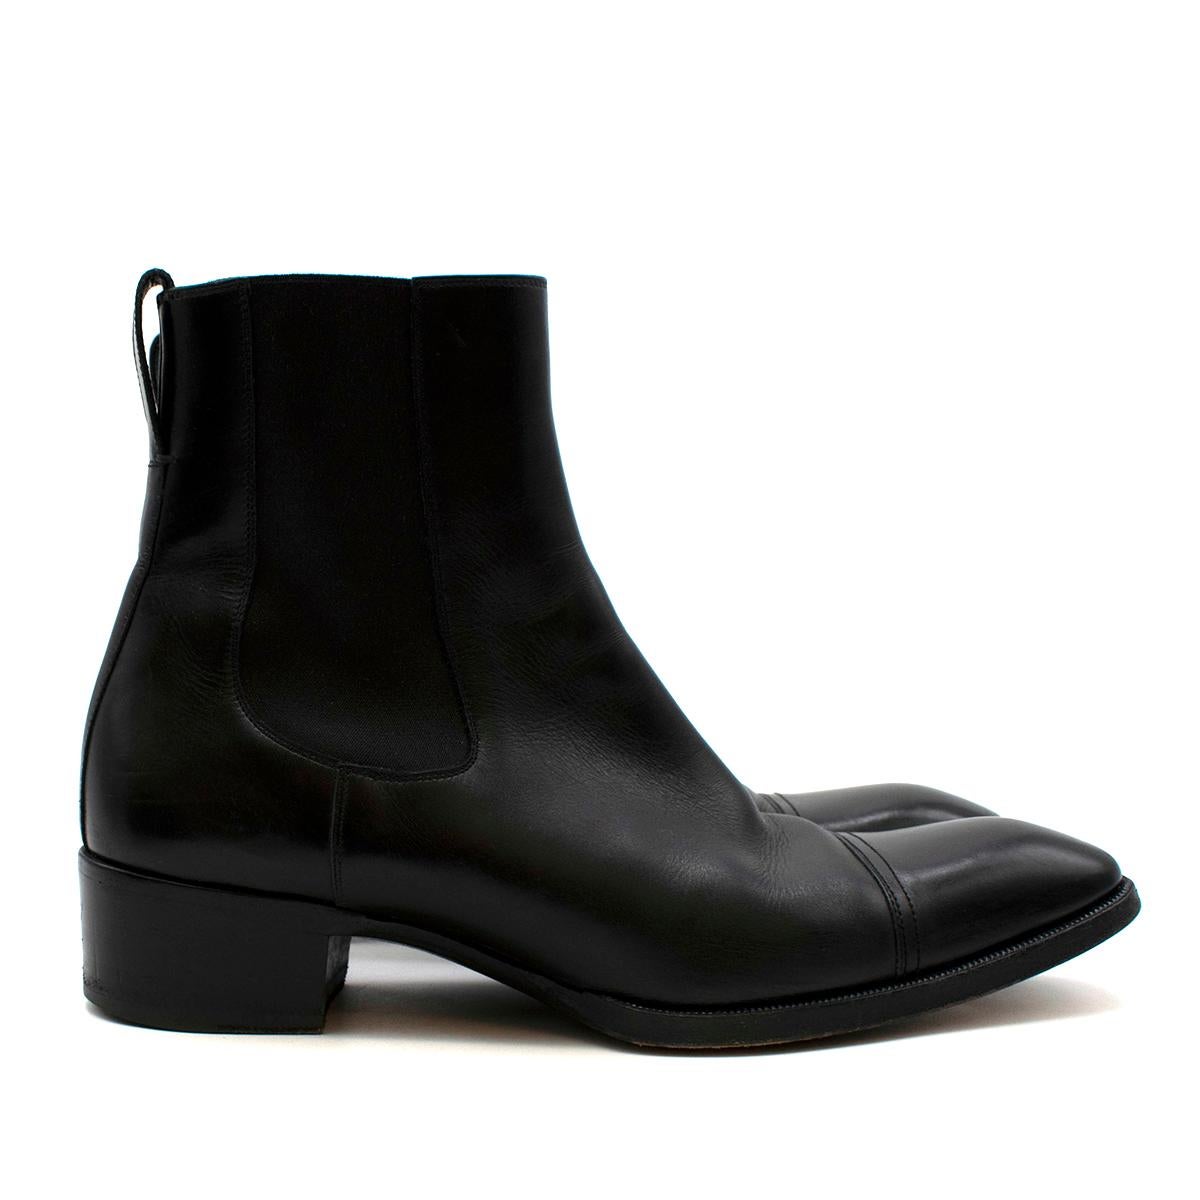 Tom Ford Black Gianni Leather Cap Toe Chelsea Boot

- Smooth, luxurious leather material
- Slip-on style
- Handmade and hand polished
- Leather toe cap detail
- Pull tabs
- Elastic gussets
- Classic, timeless design

Materials:
Main-